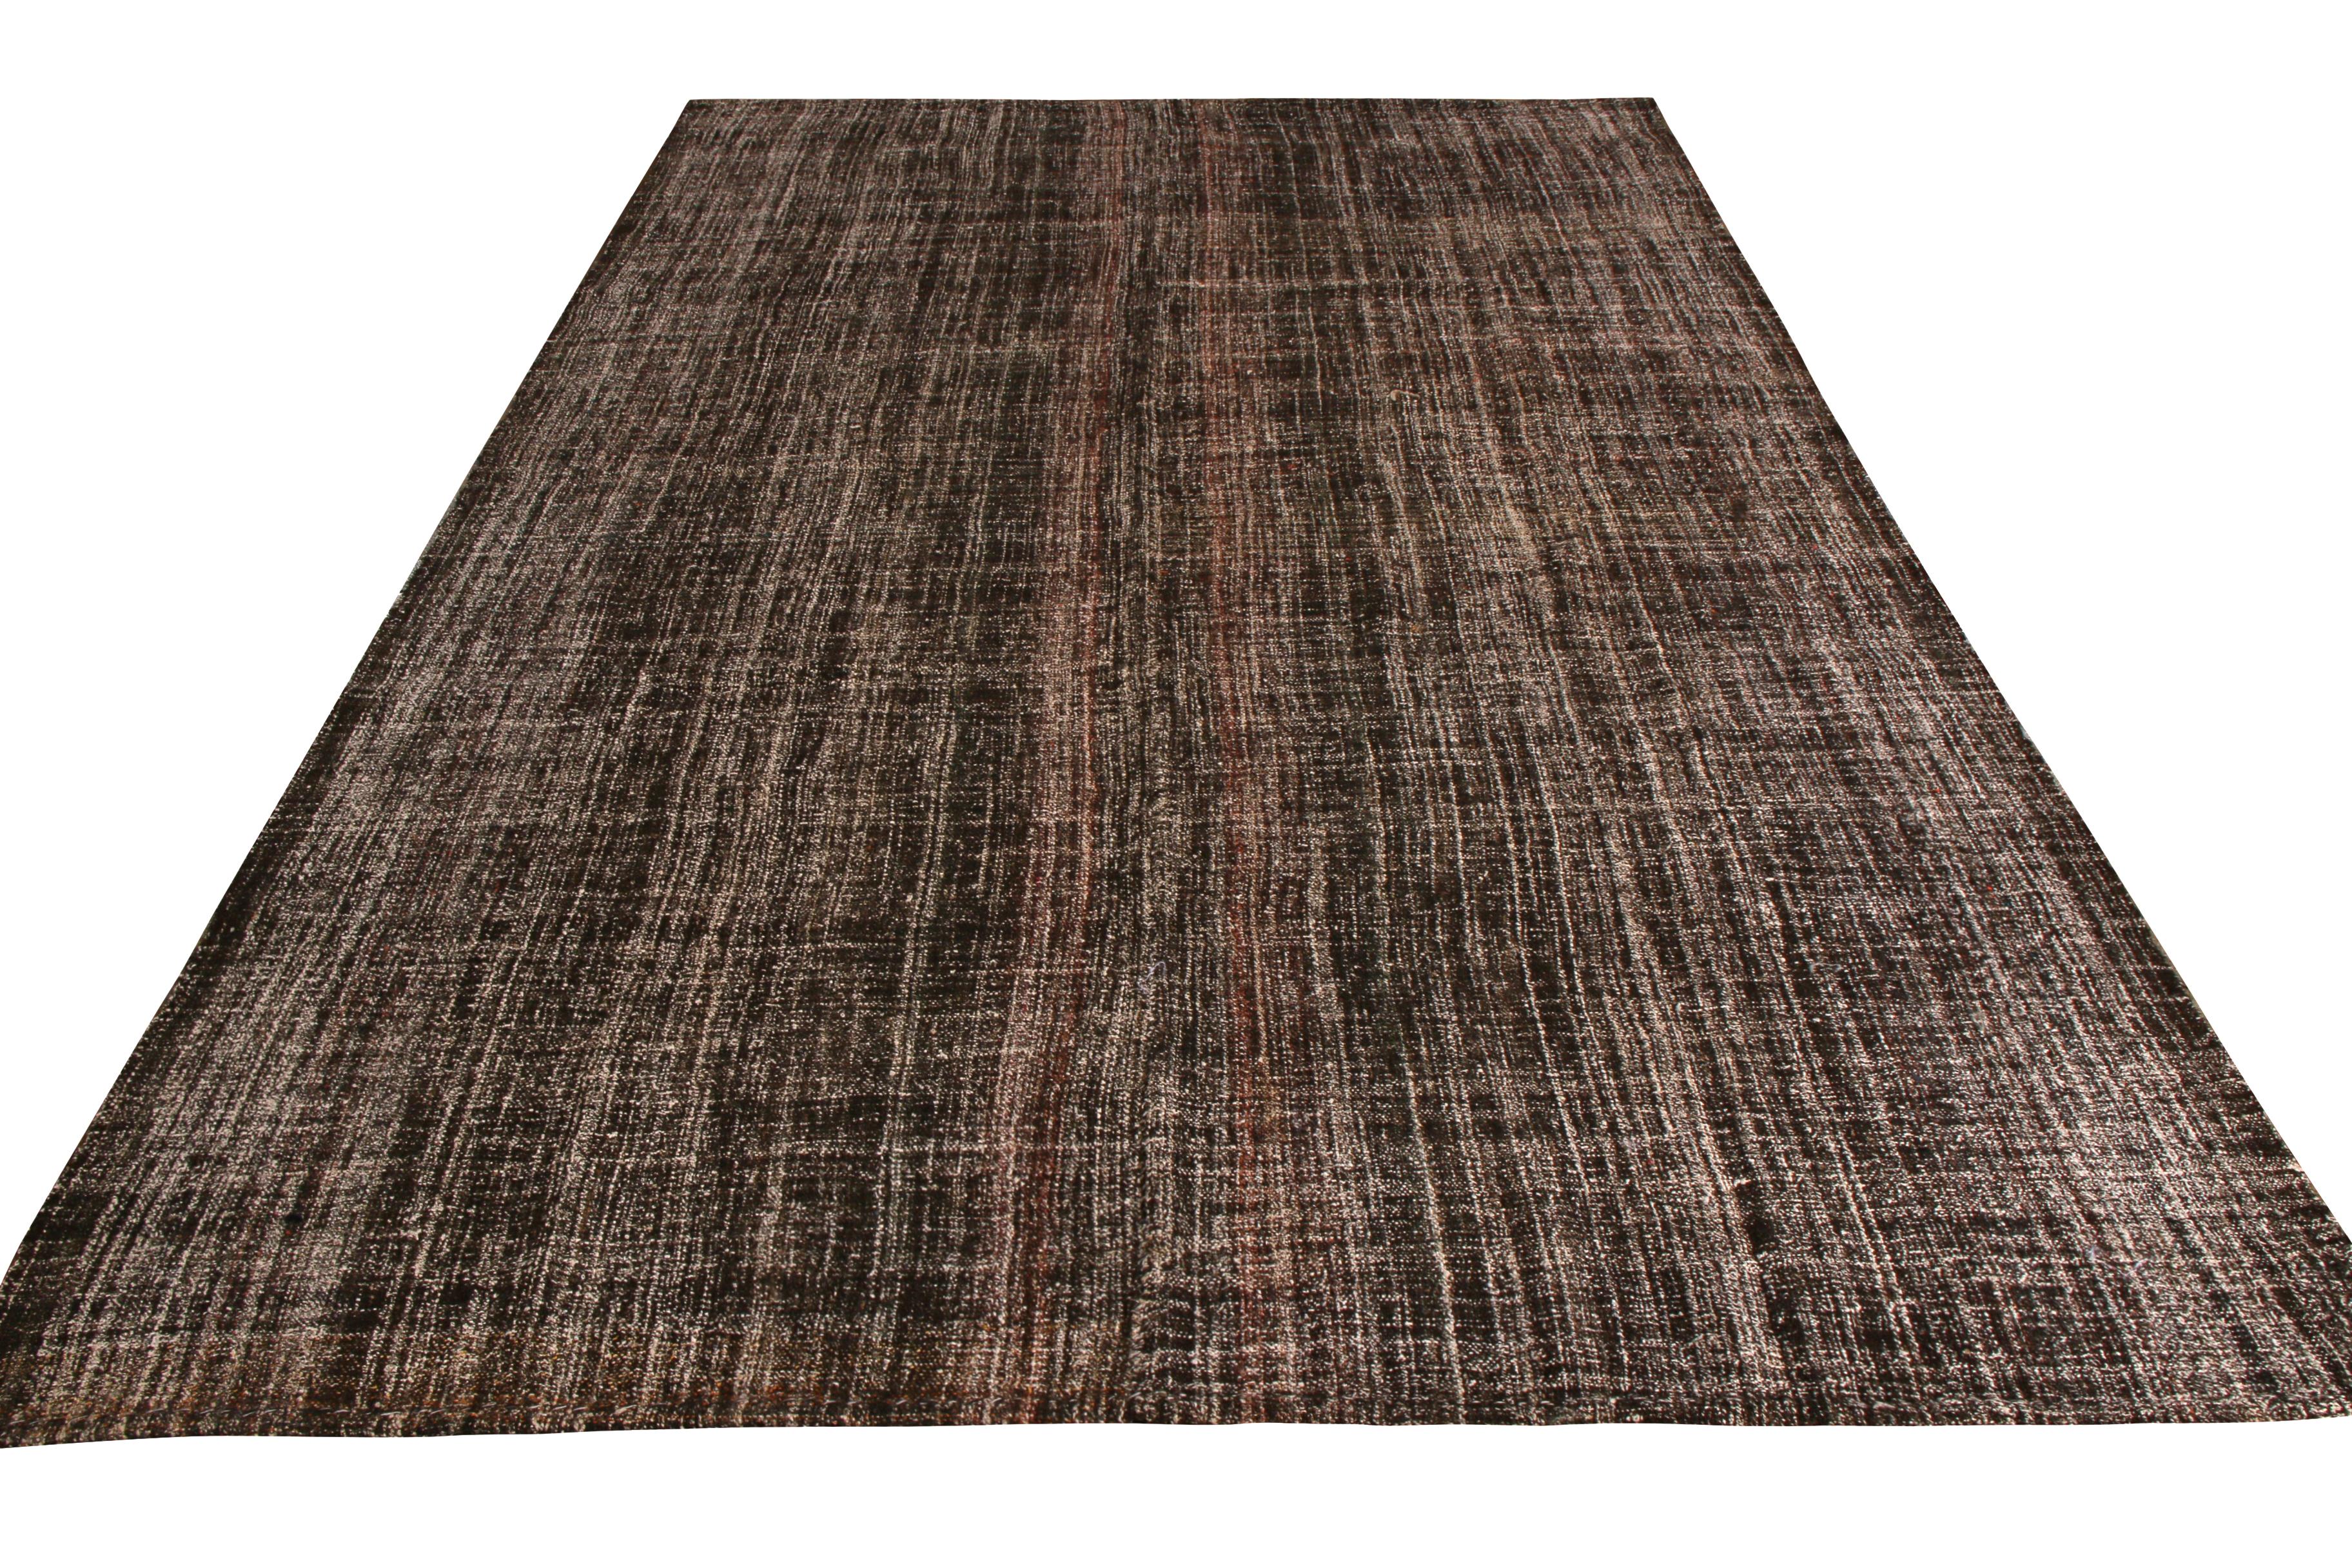 Handwoven in wool originating from Turkey between 1950-1960, this vintage midcentury striped Kilim rug enjoys a rare distinction through subtlety, employing subtle rich colorway variations in the striped-meets-solid beige brown pattern lending a